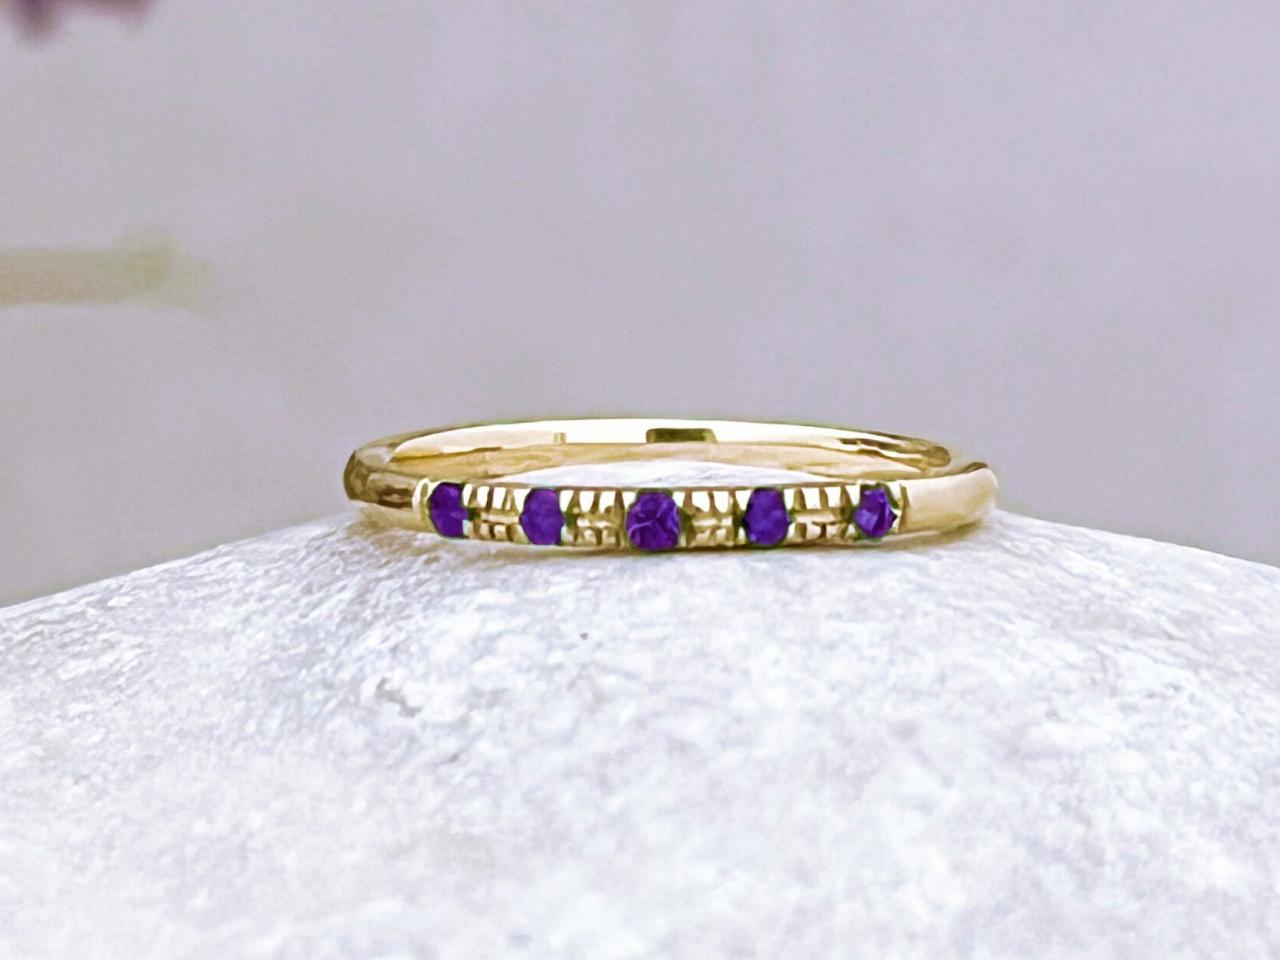 Solid Gold Wedding Band With Amethyst, Purple Gemstones Minimalist Bridal Ring, 9k/18k Delicate Stacking Ring